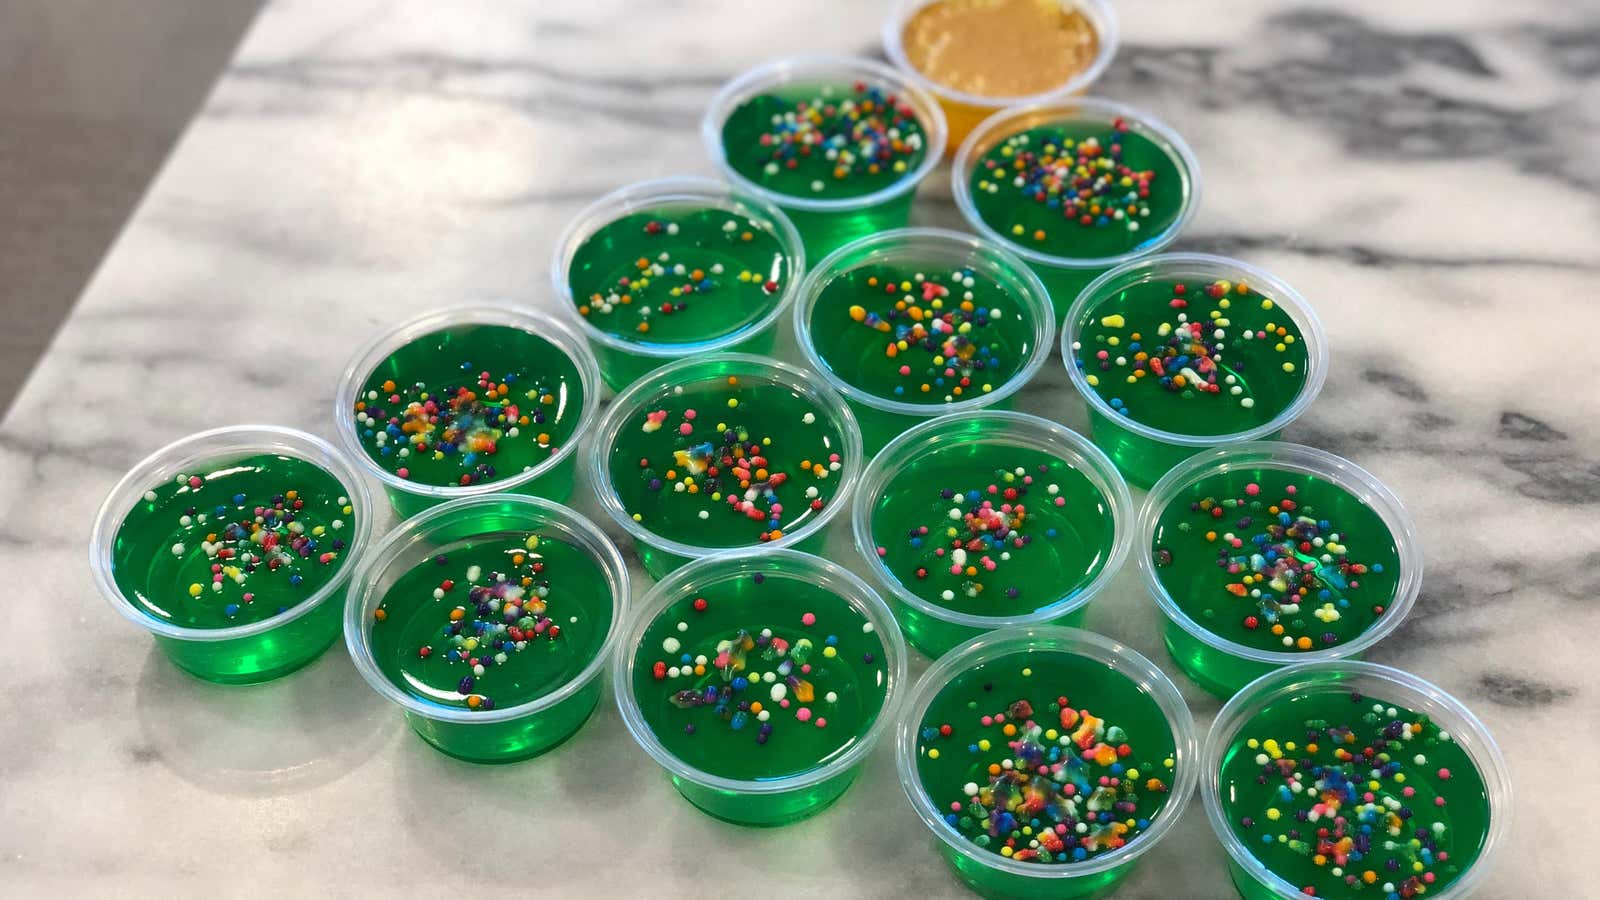 Holiday Jell-O shots: a definitive guide